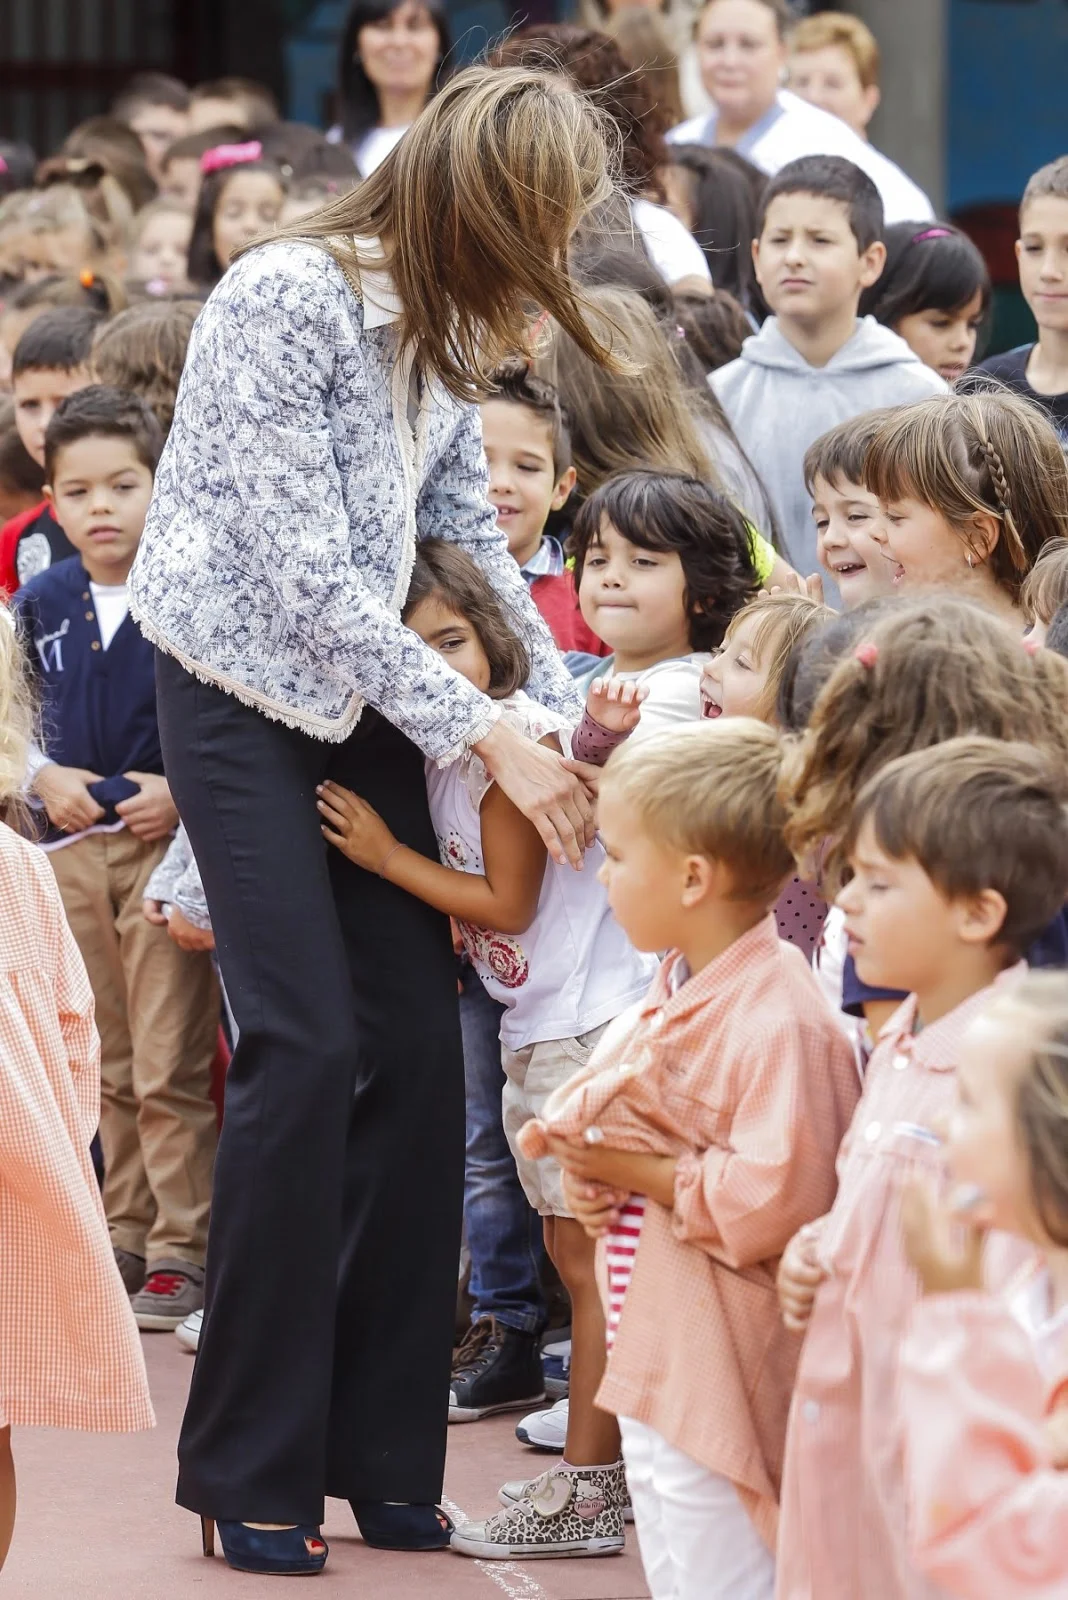 Queen Letizia in particular received a warm and adorable welcome by a girl, who threw her arms around the Queen’s legs.